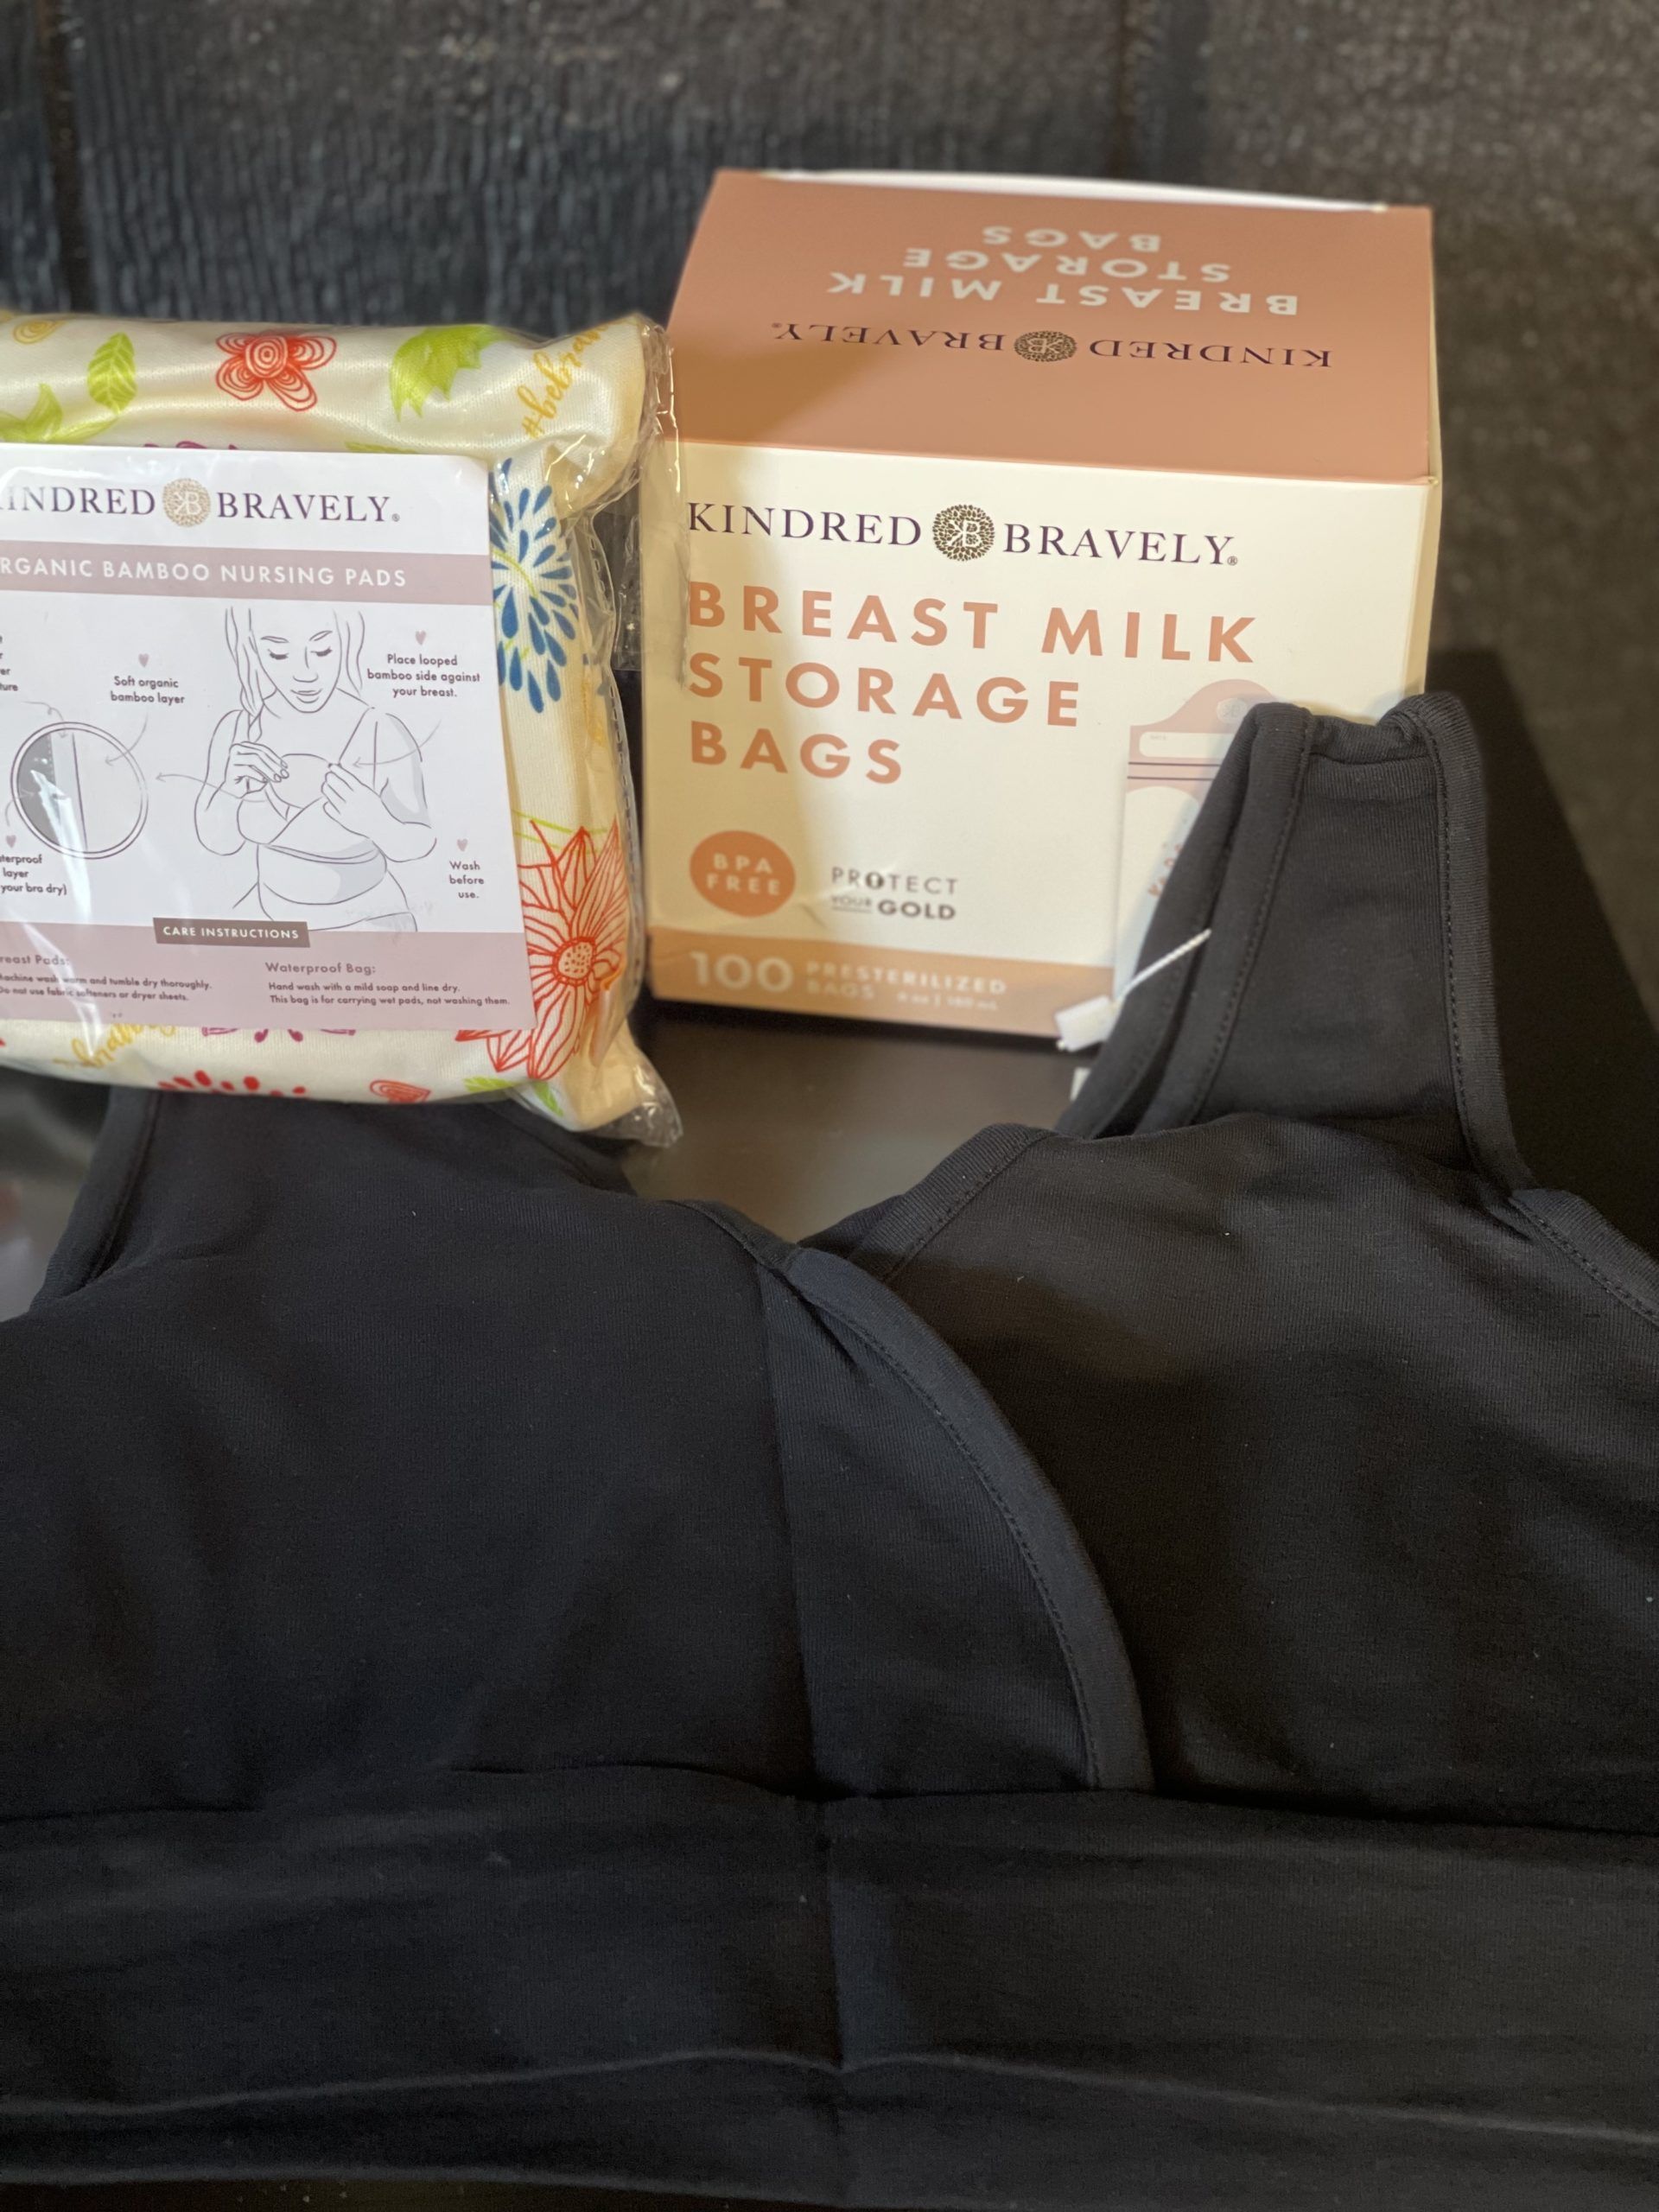 Kindred Bravely bra, breast pads, and milk storage bags - M10 Boutique